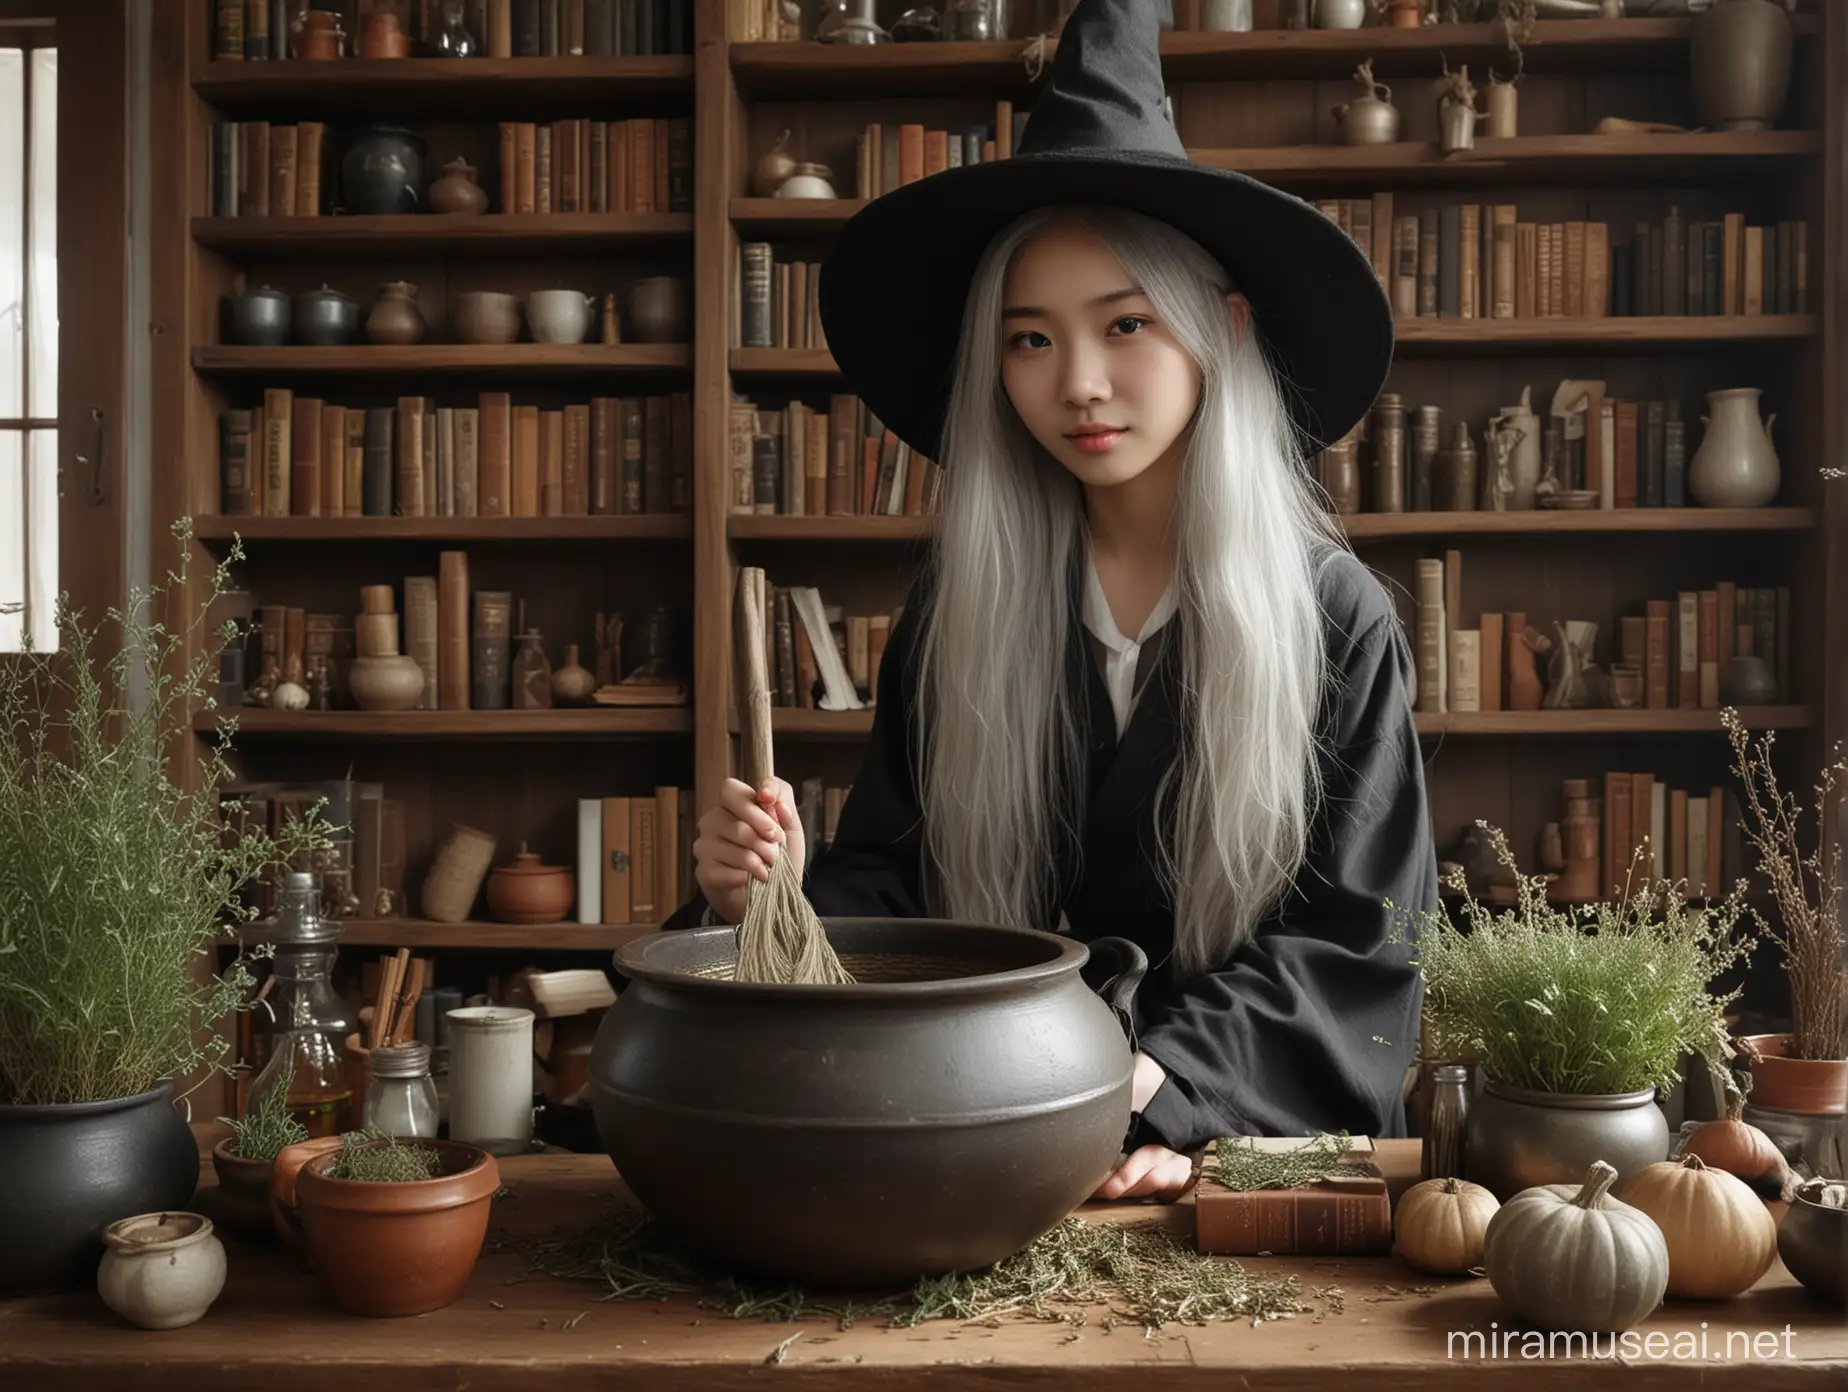 a witch hut, a cauldron, a girl, 22 years old, Korean Features, Grey-shaded white long hair, playful expression, wizard hat, stirring cauldron, room filled with dried herbs, bookshelves, intricate details, HDR, beautifully shot, hyperrealistic, sharp focus, 64 megapixels, perfect composition, high contrast, cinematic, atmospheric, moody 